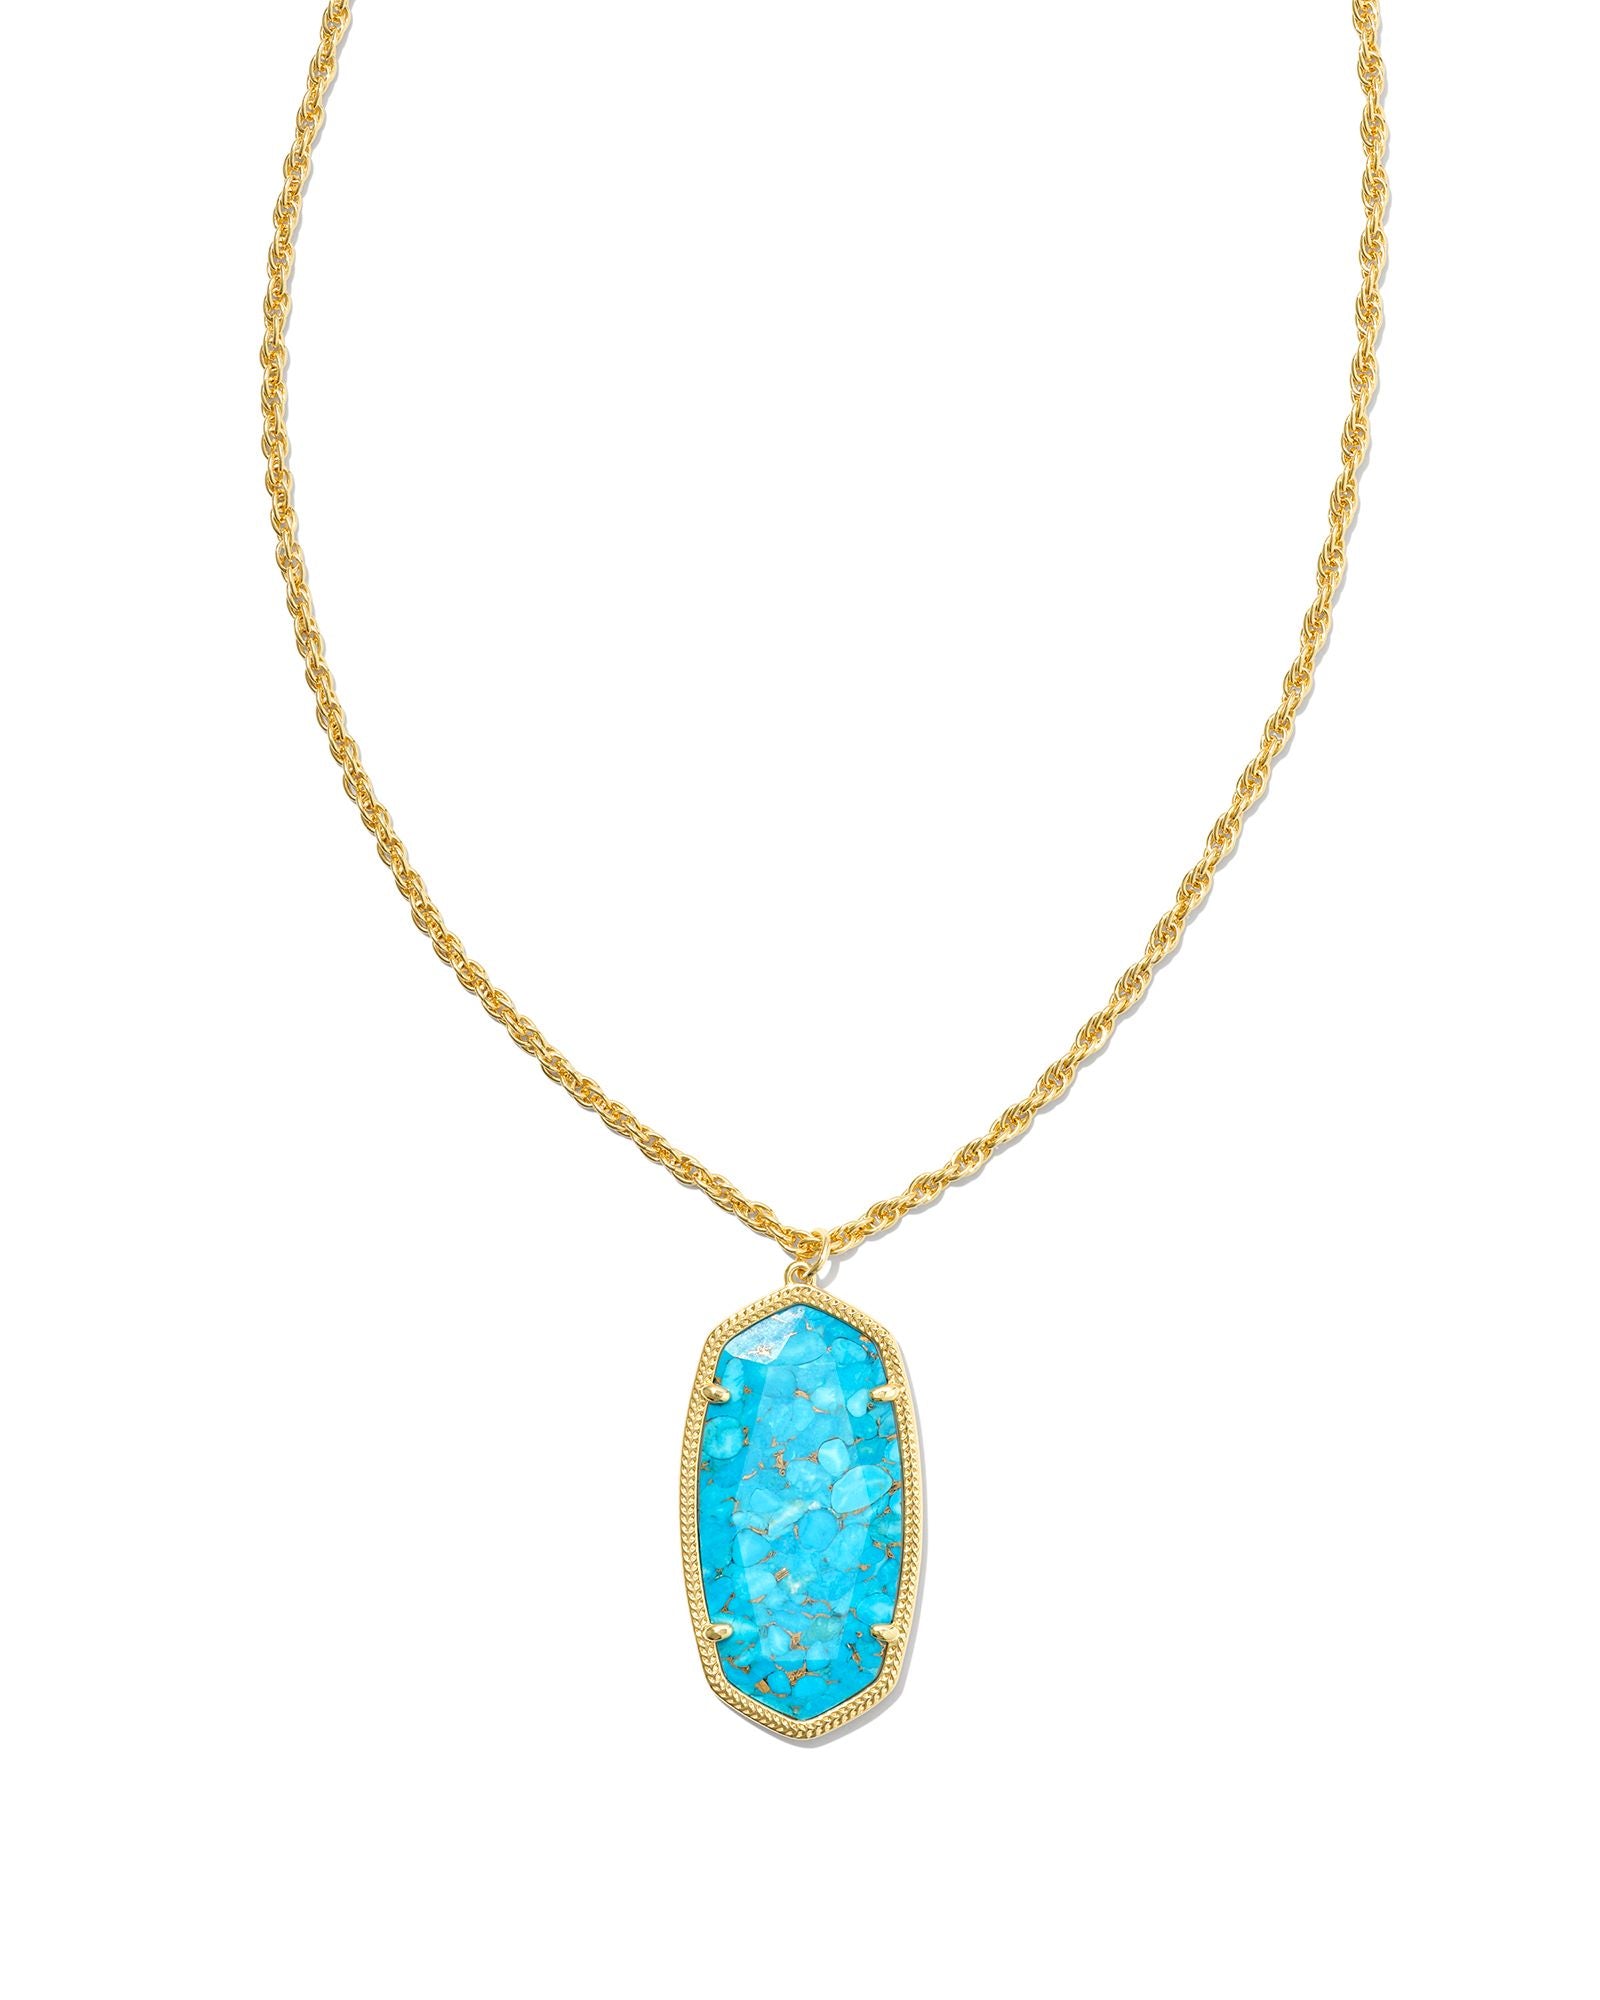 Rae Long Pendant Necklace in Gold Bronze Veined Turquoise Magnesite